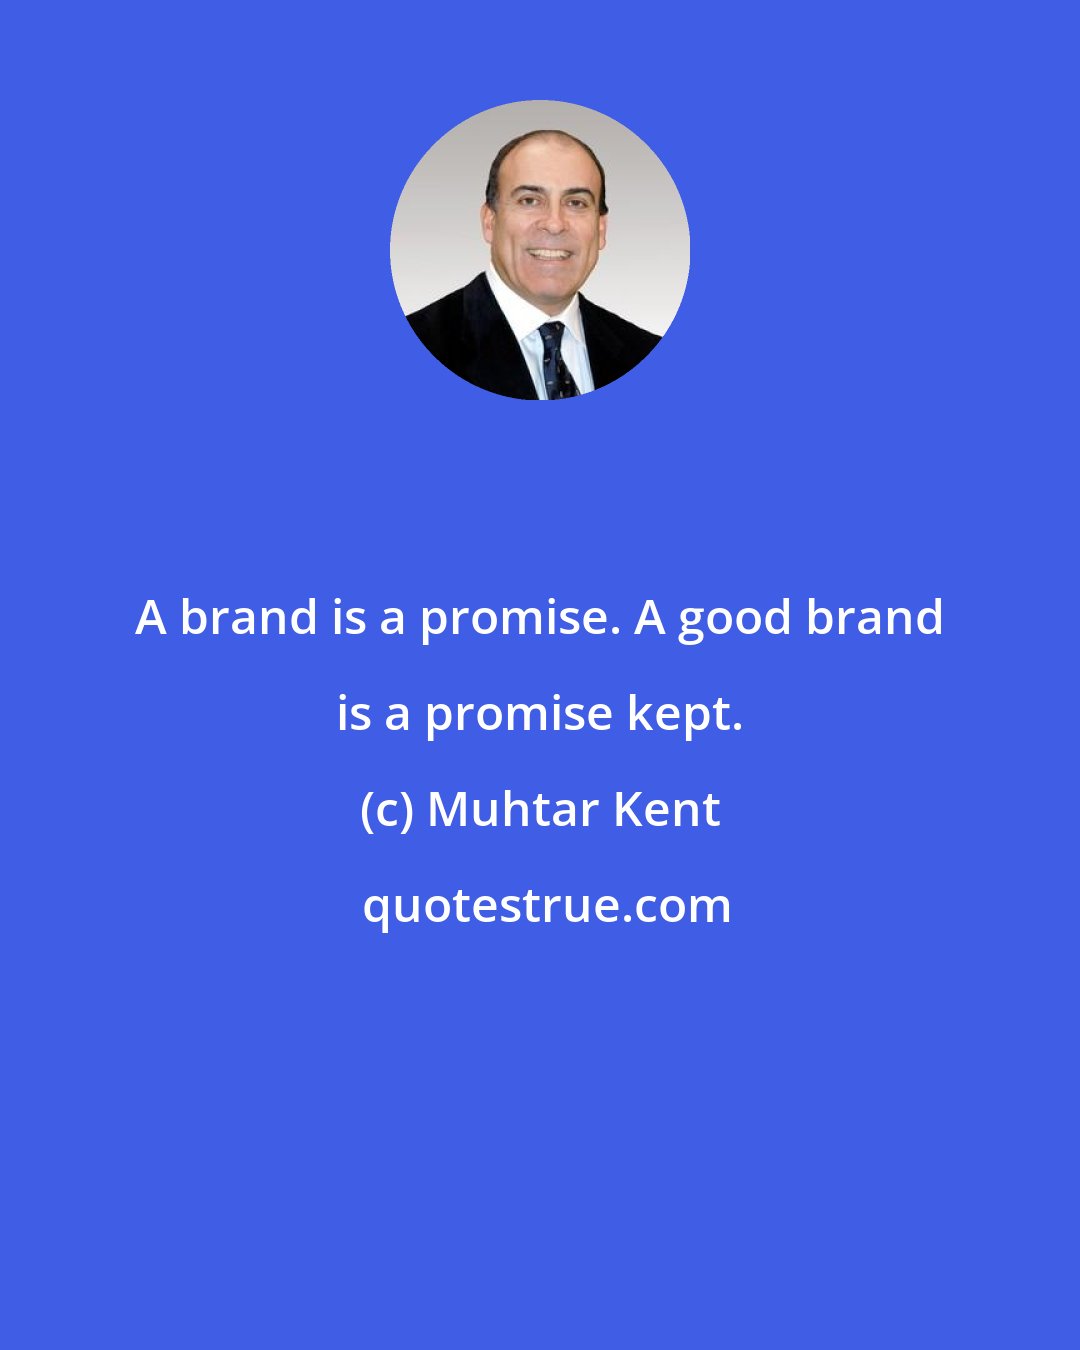 Muhtar Kent: A brand is a promise. A good brand is a promise kept.